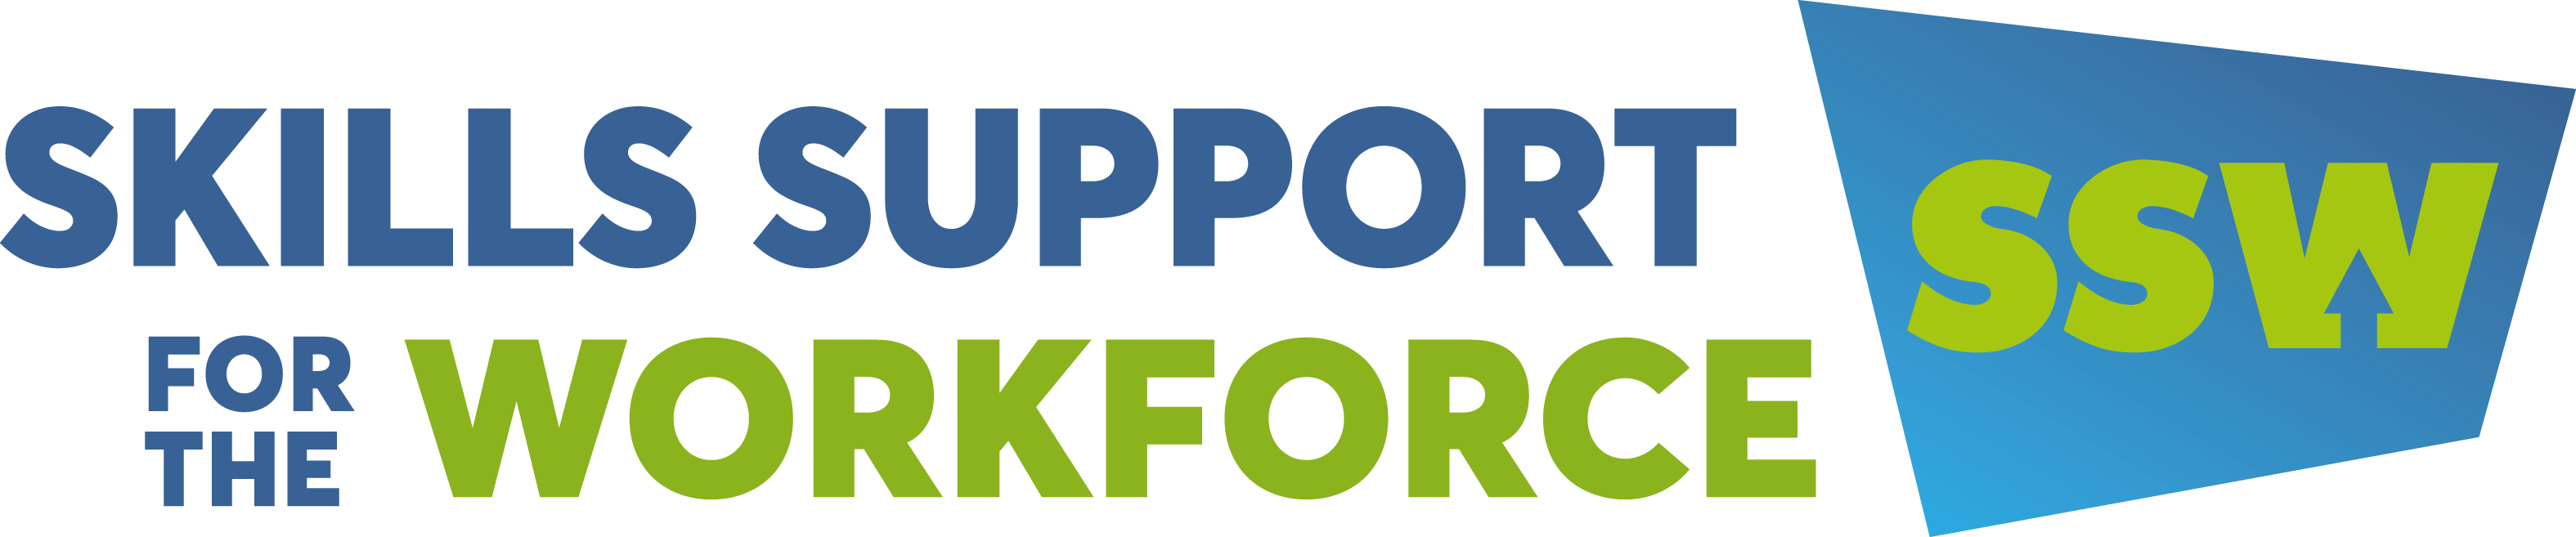 Serco - Skills Support for the Workforce Logo